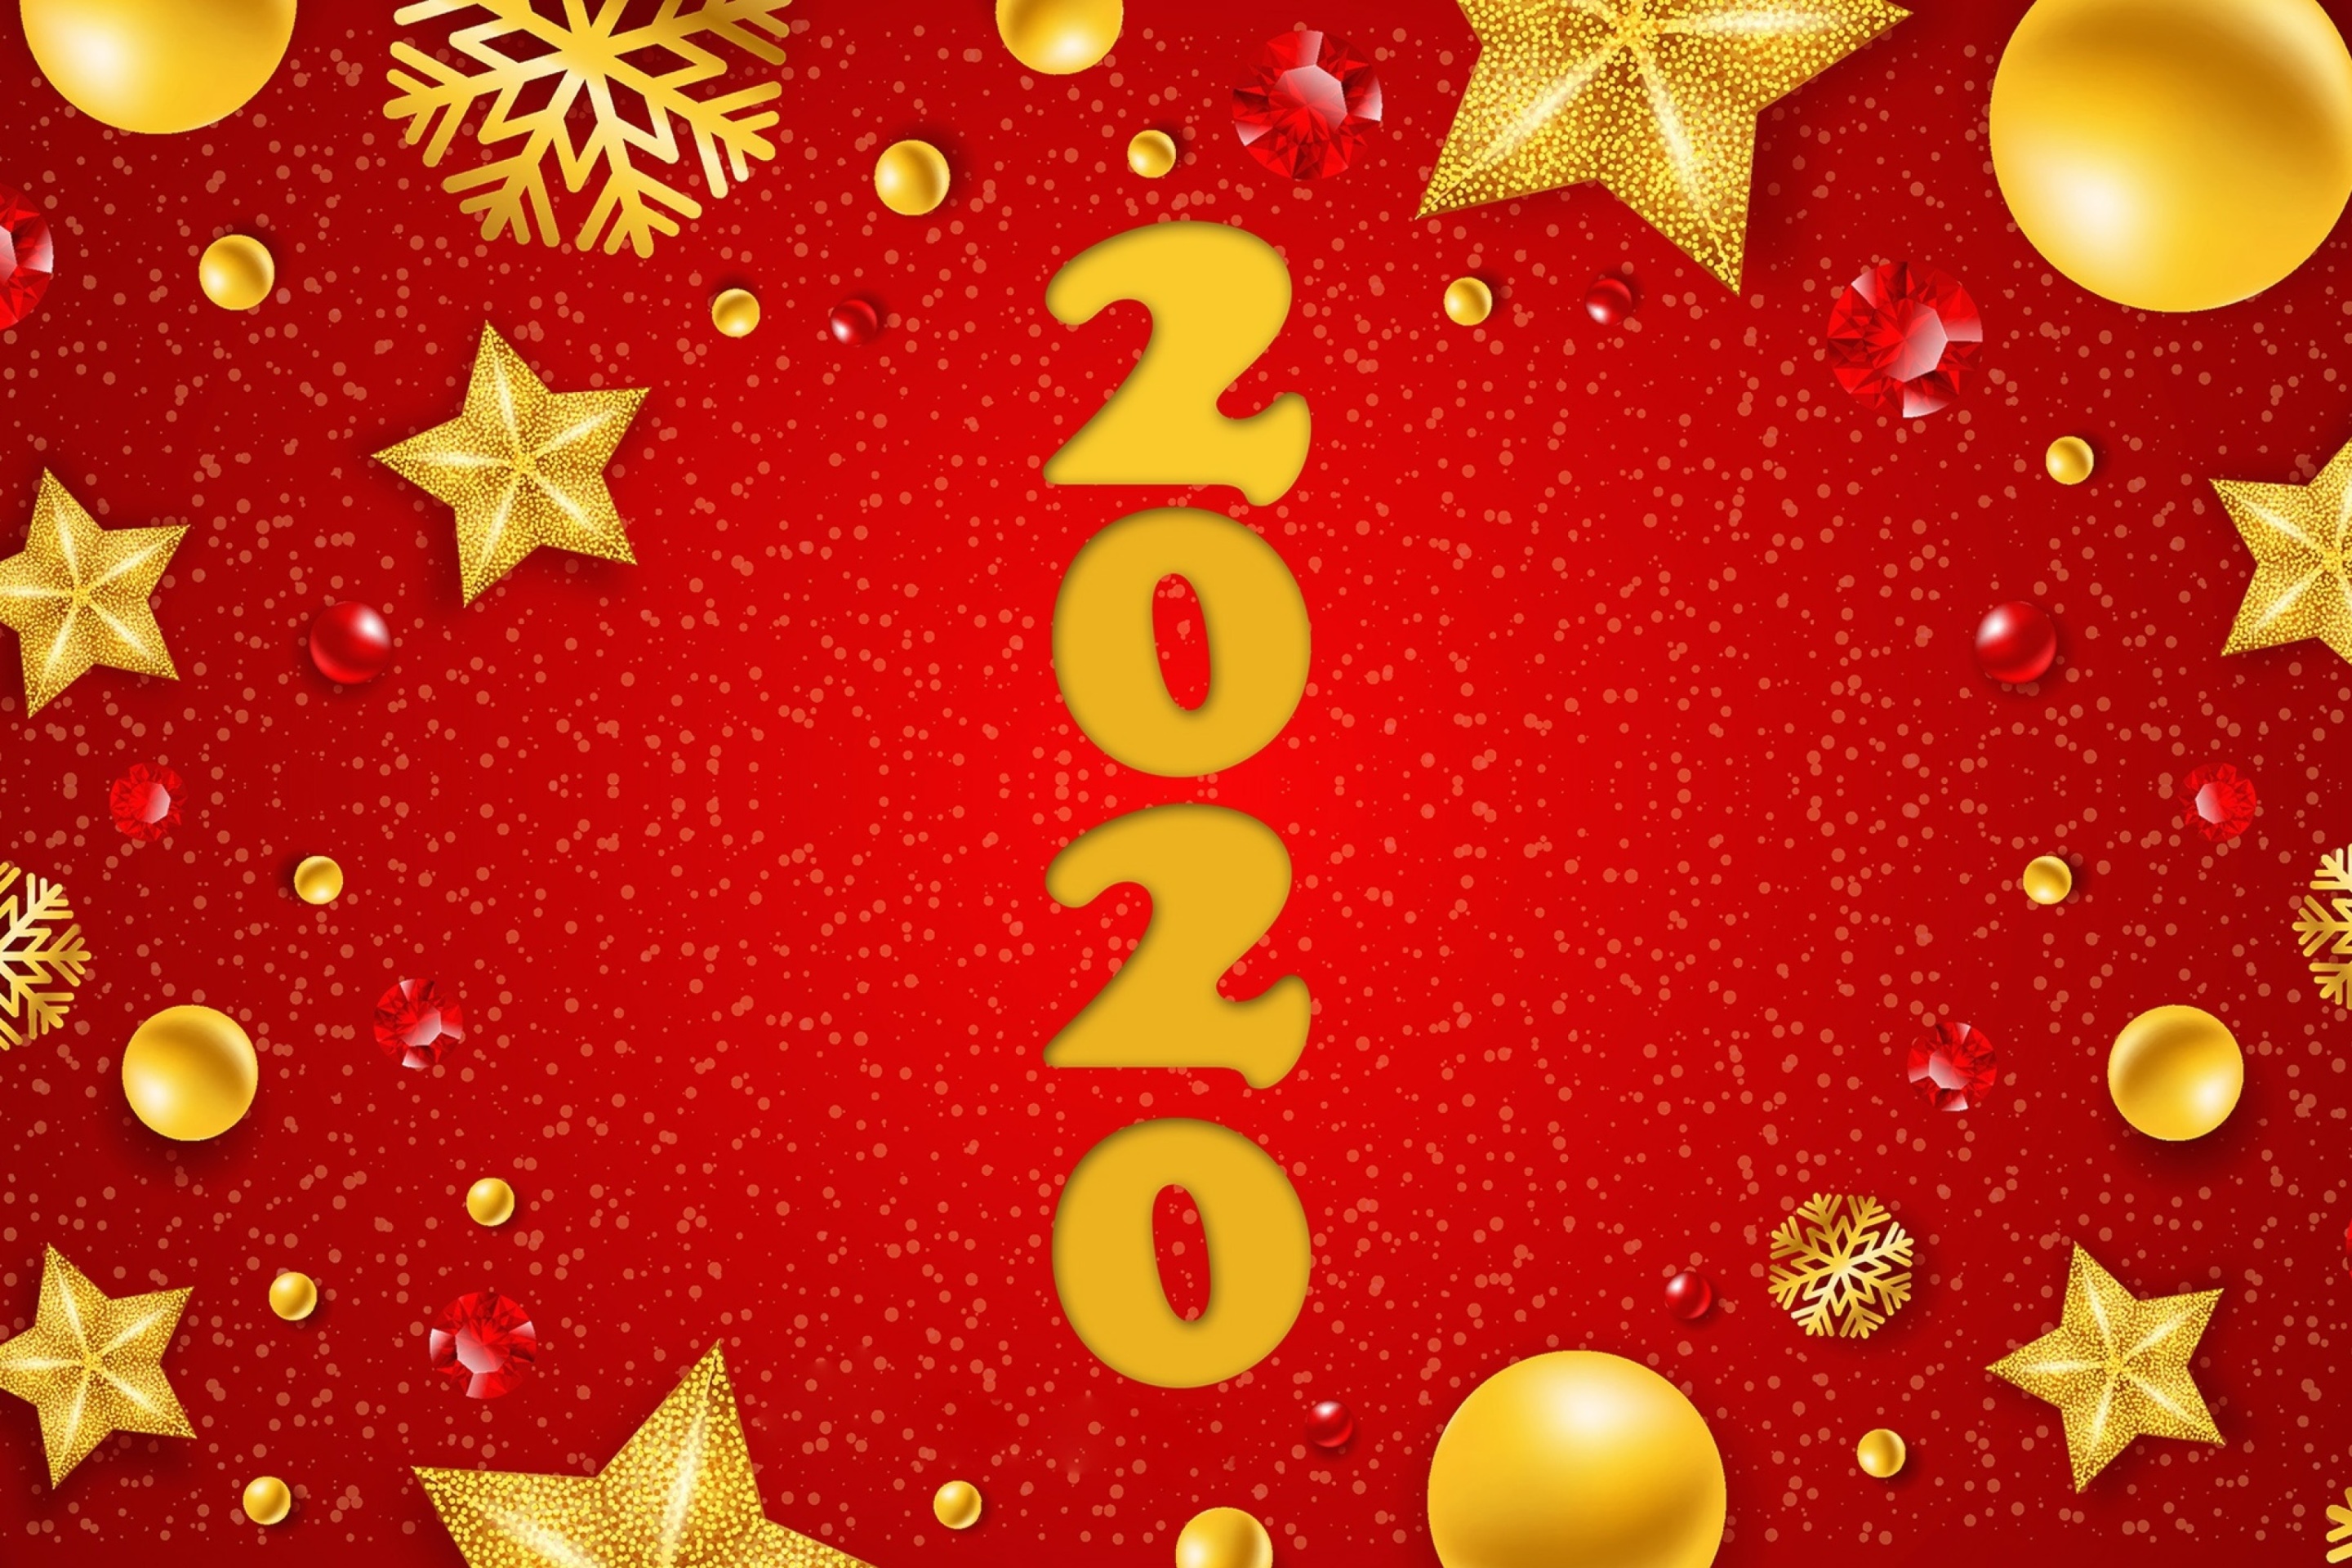 Das Happy New Year 2020 Messages Wallpaper 2880x1920